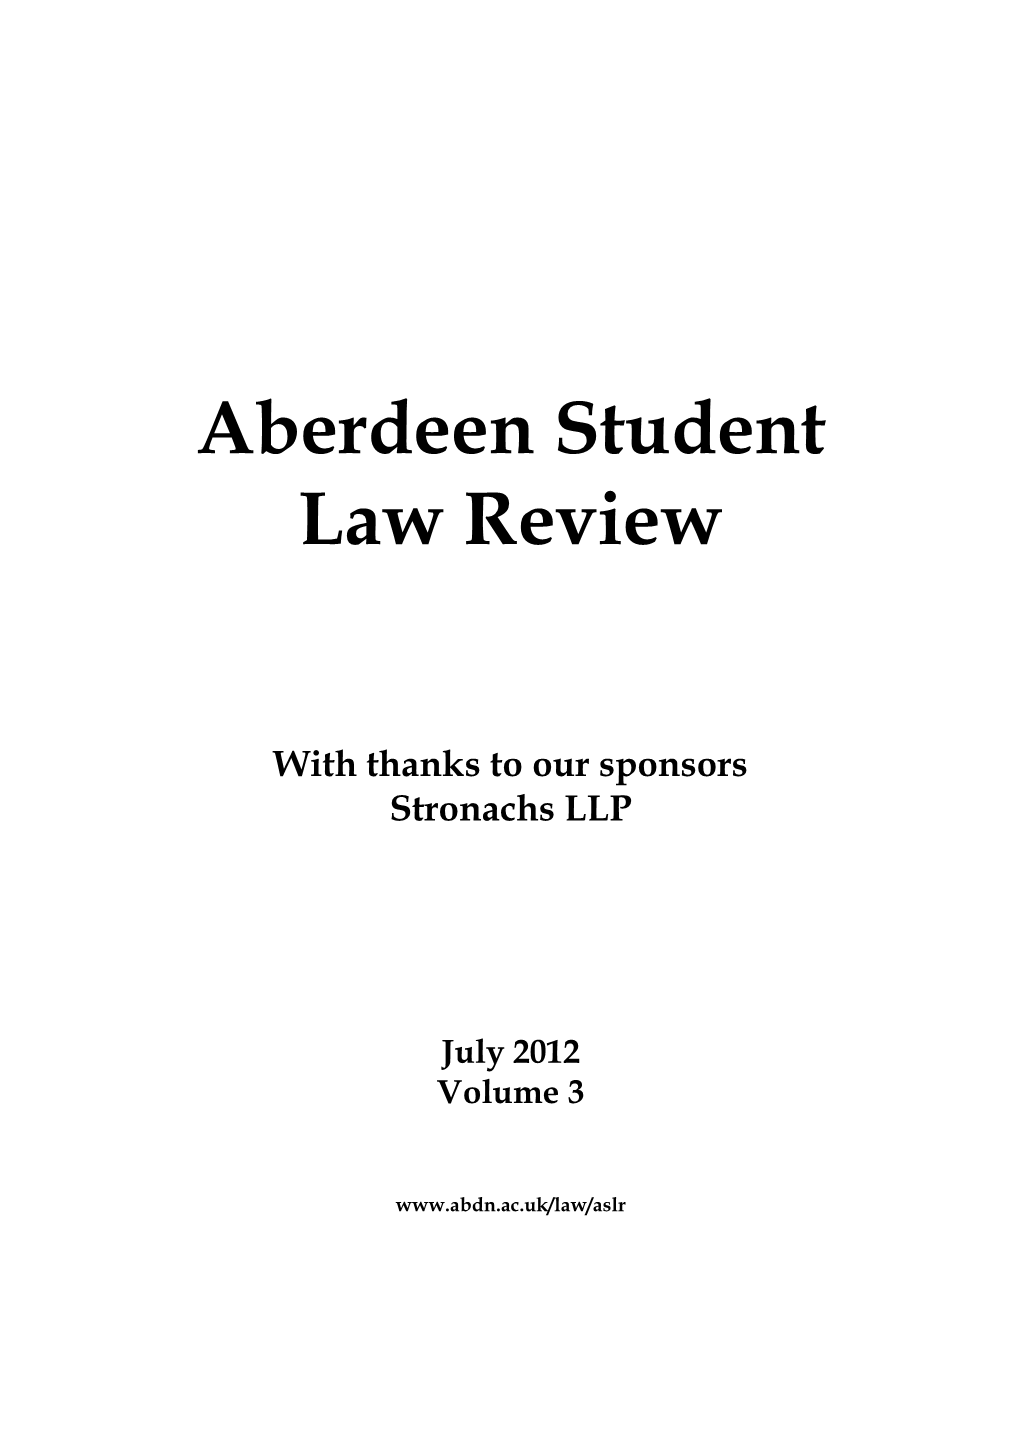 Aberdeen Student Law Review